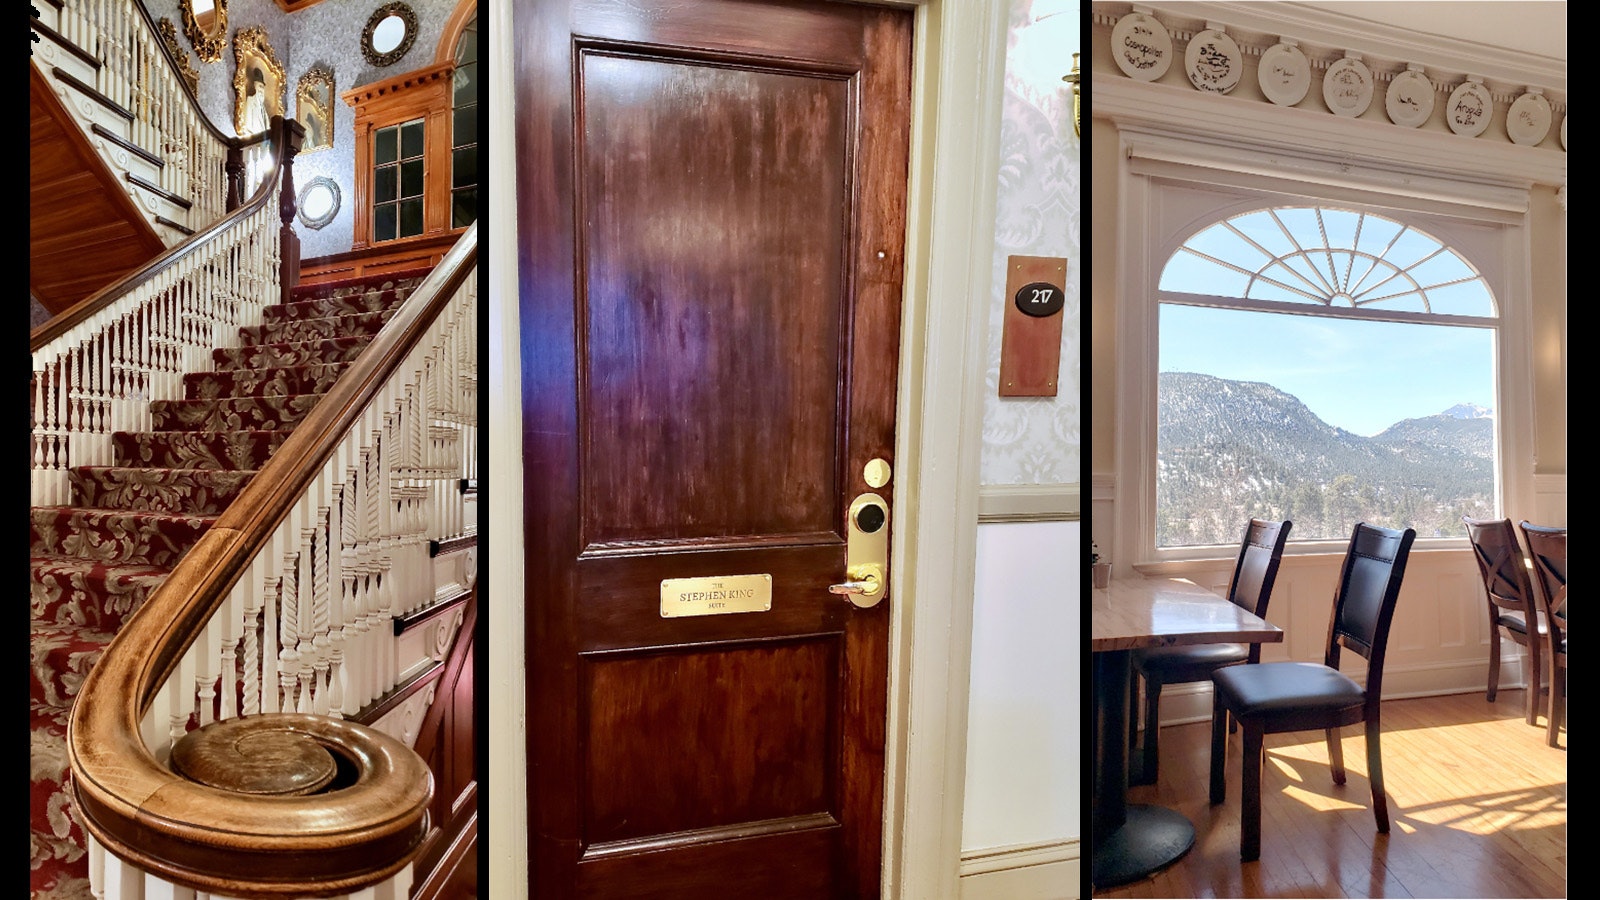 After taking the ornate staircase, the door to Room 217 is like any other door in The Stanley Hotel. There also are great views from the dining room.